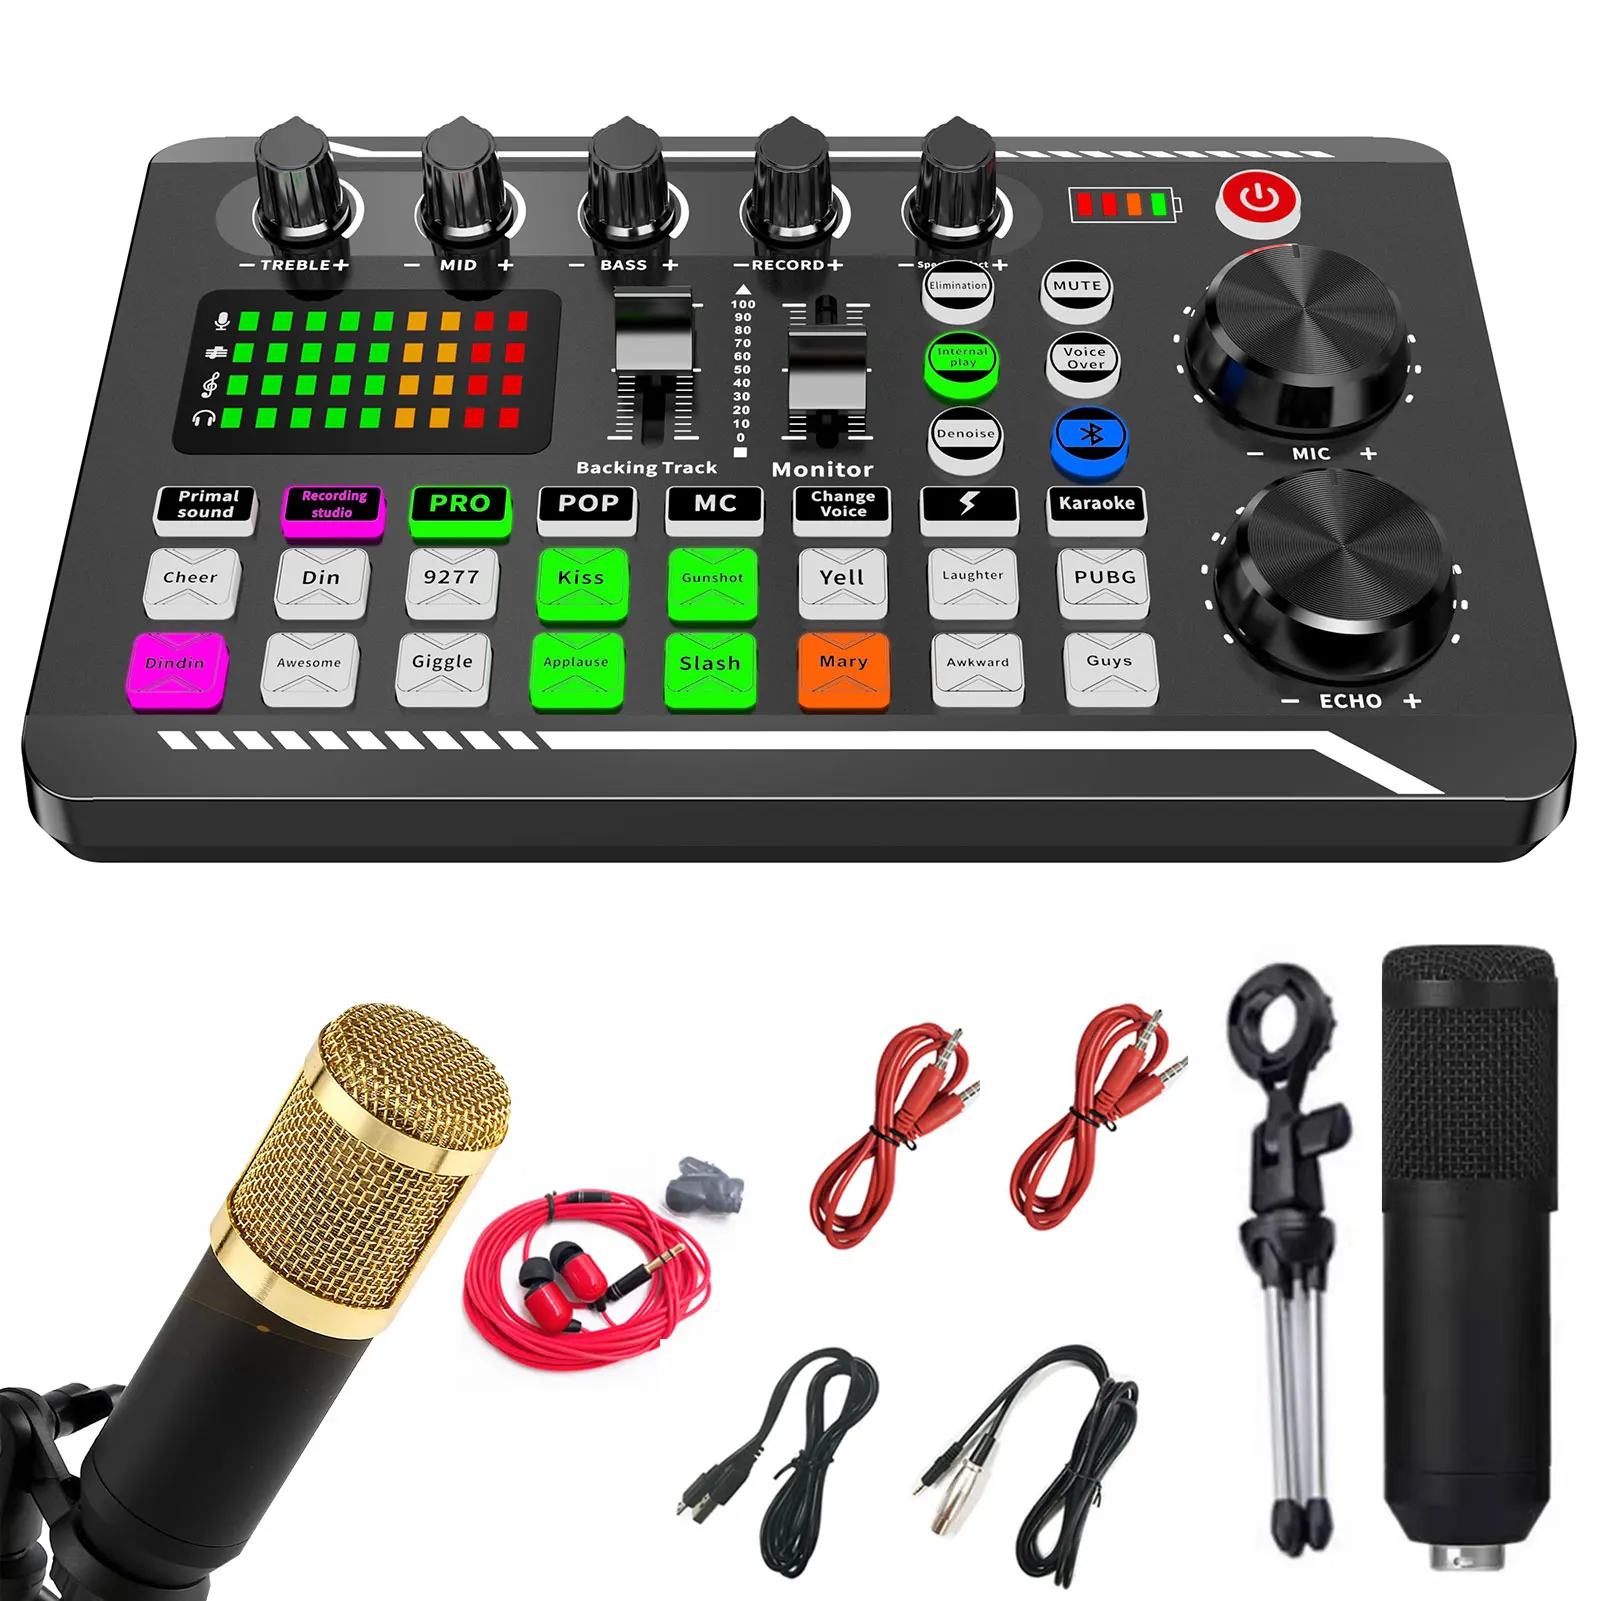 

Sound Card Kit For Live Streaming Professional Audio Mixer English Version All InPodcast Production Studio For Podcast